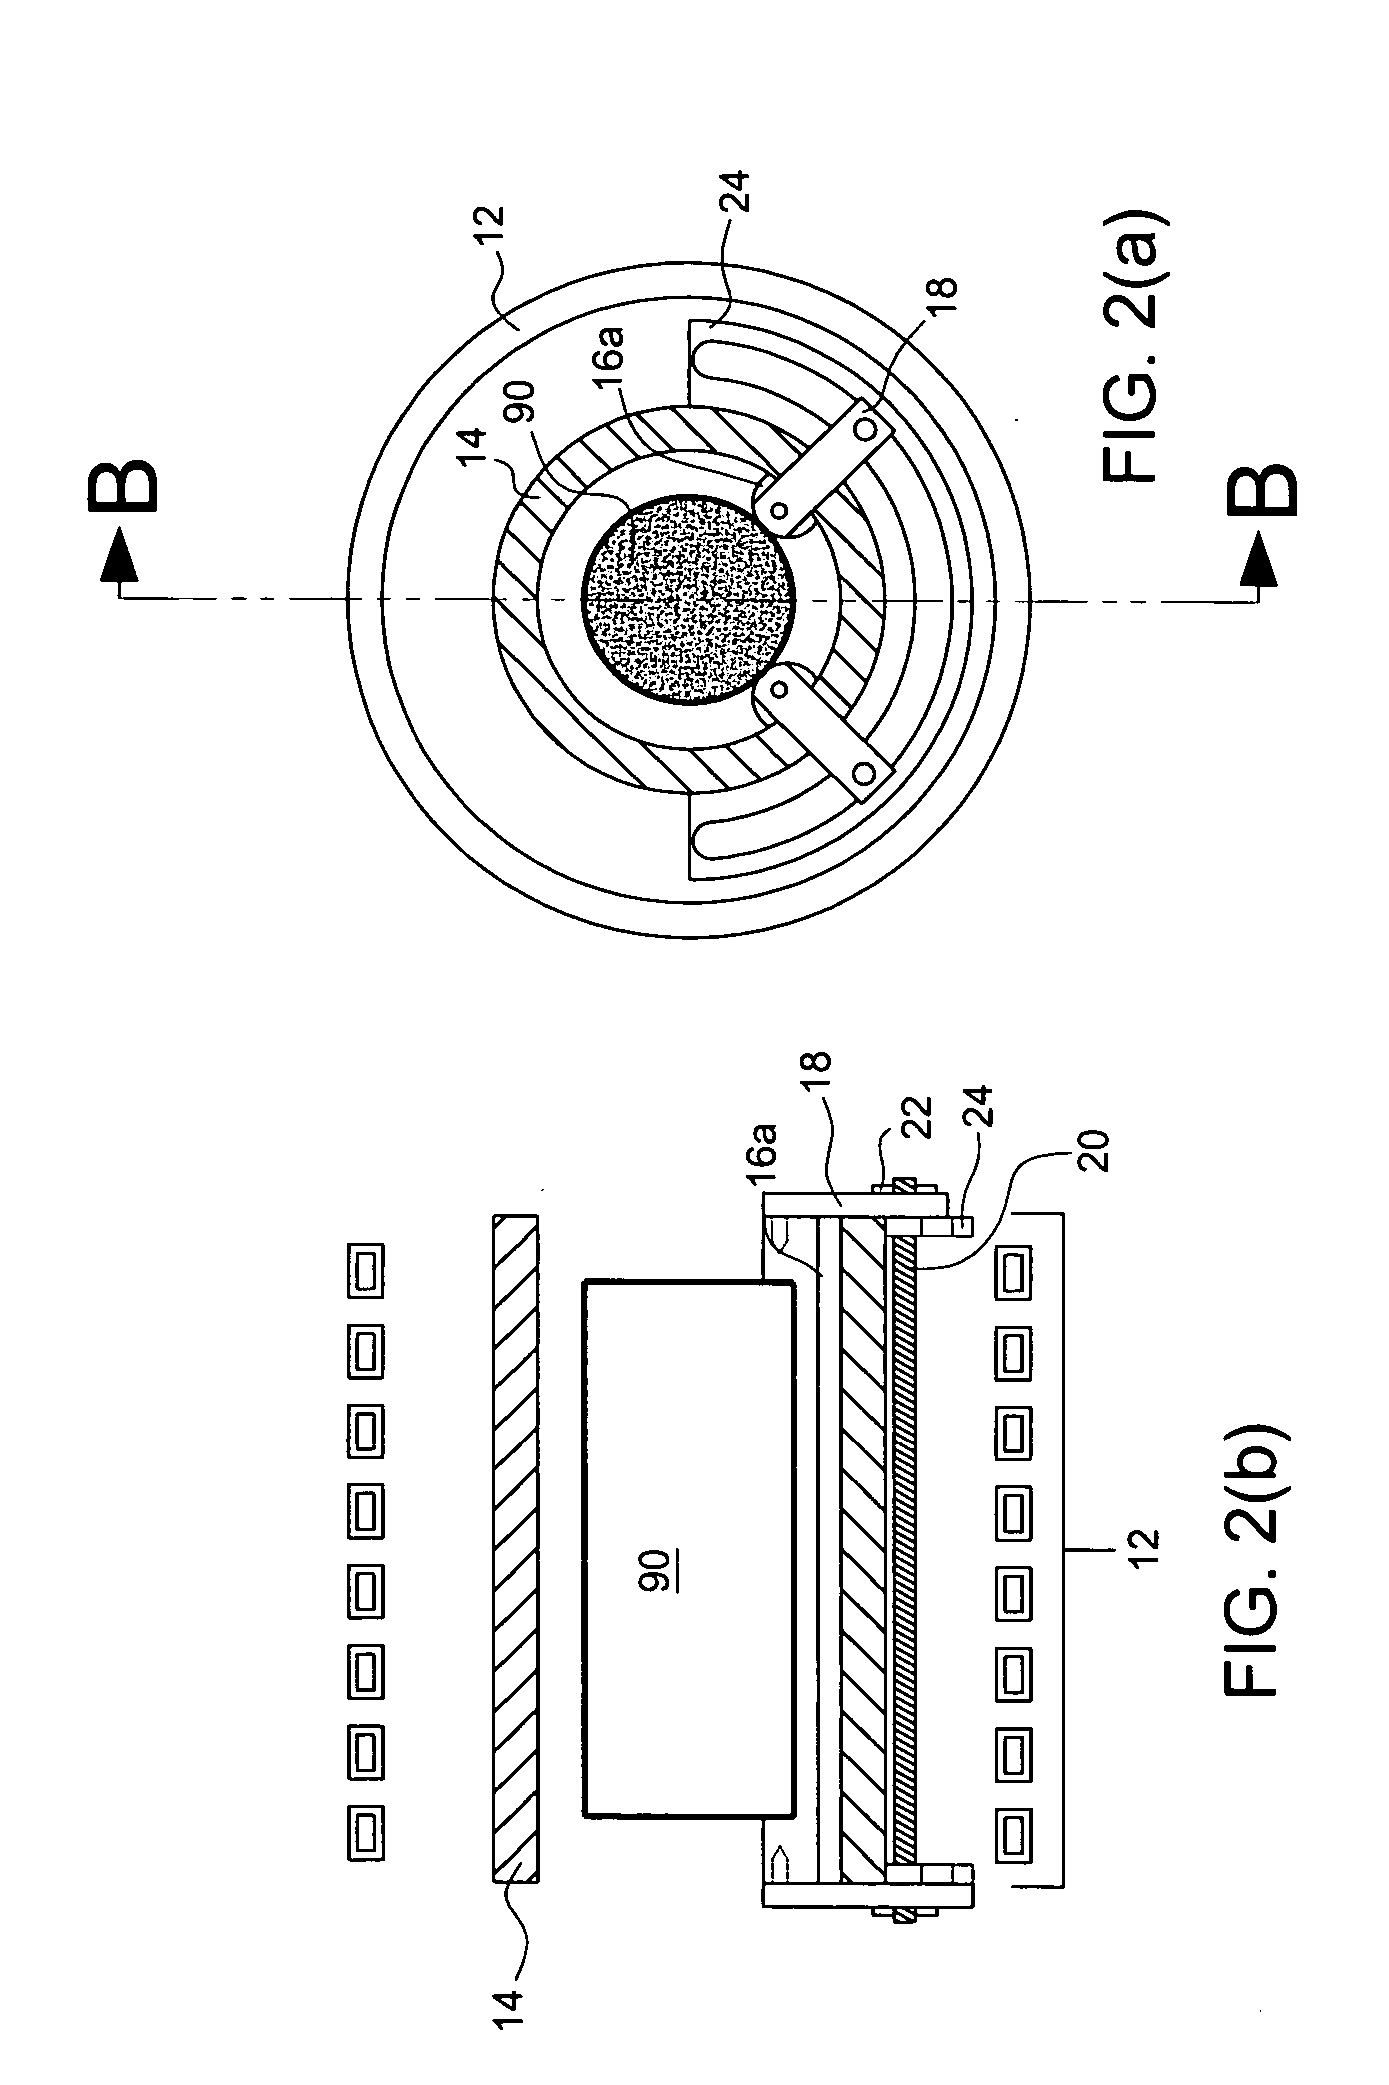 Billet support system for induction heating